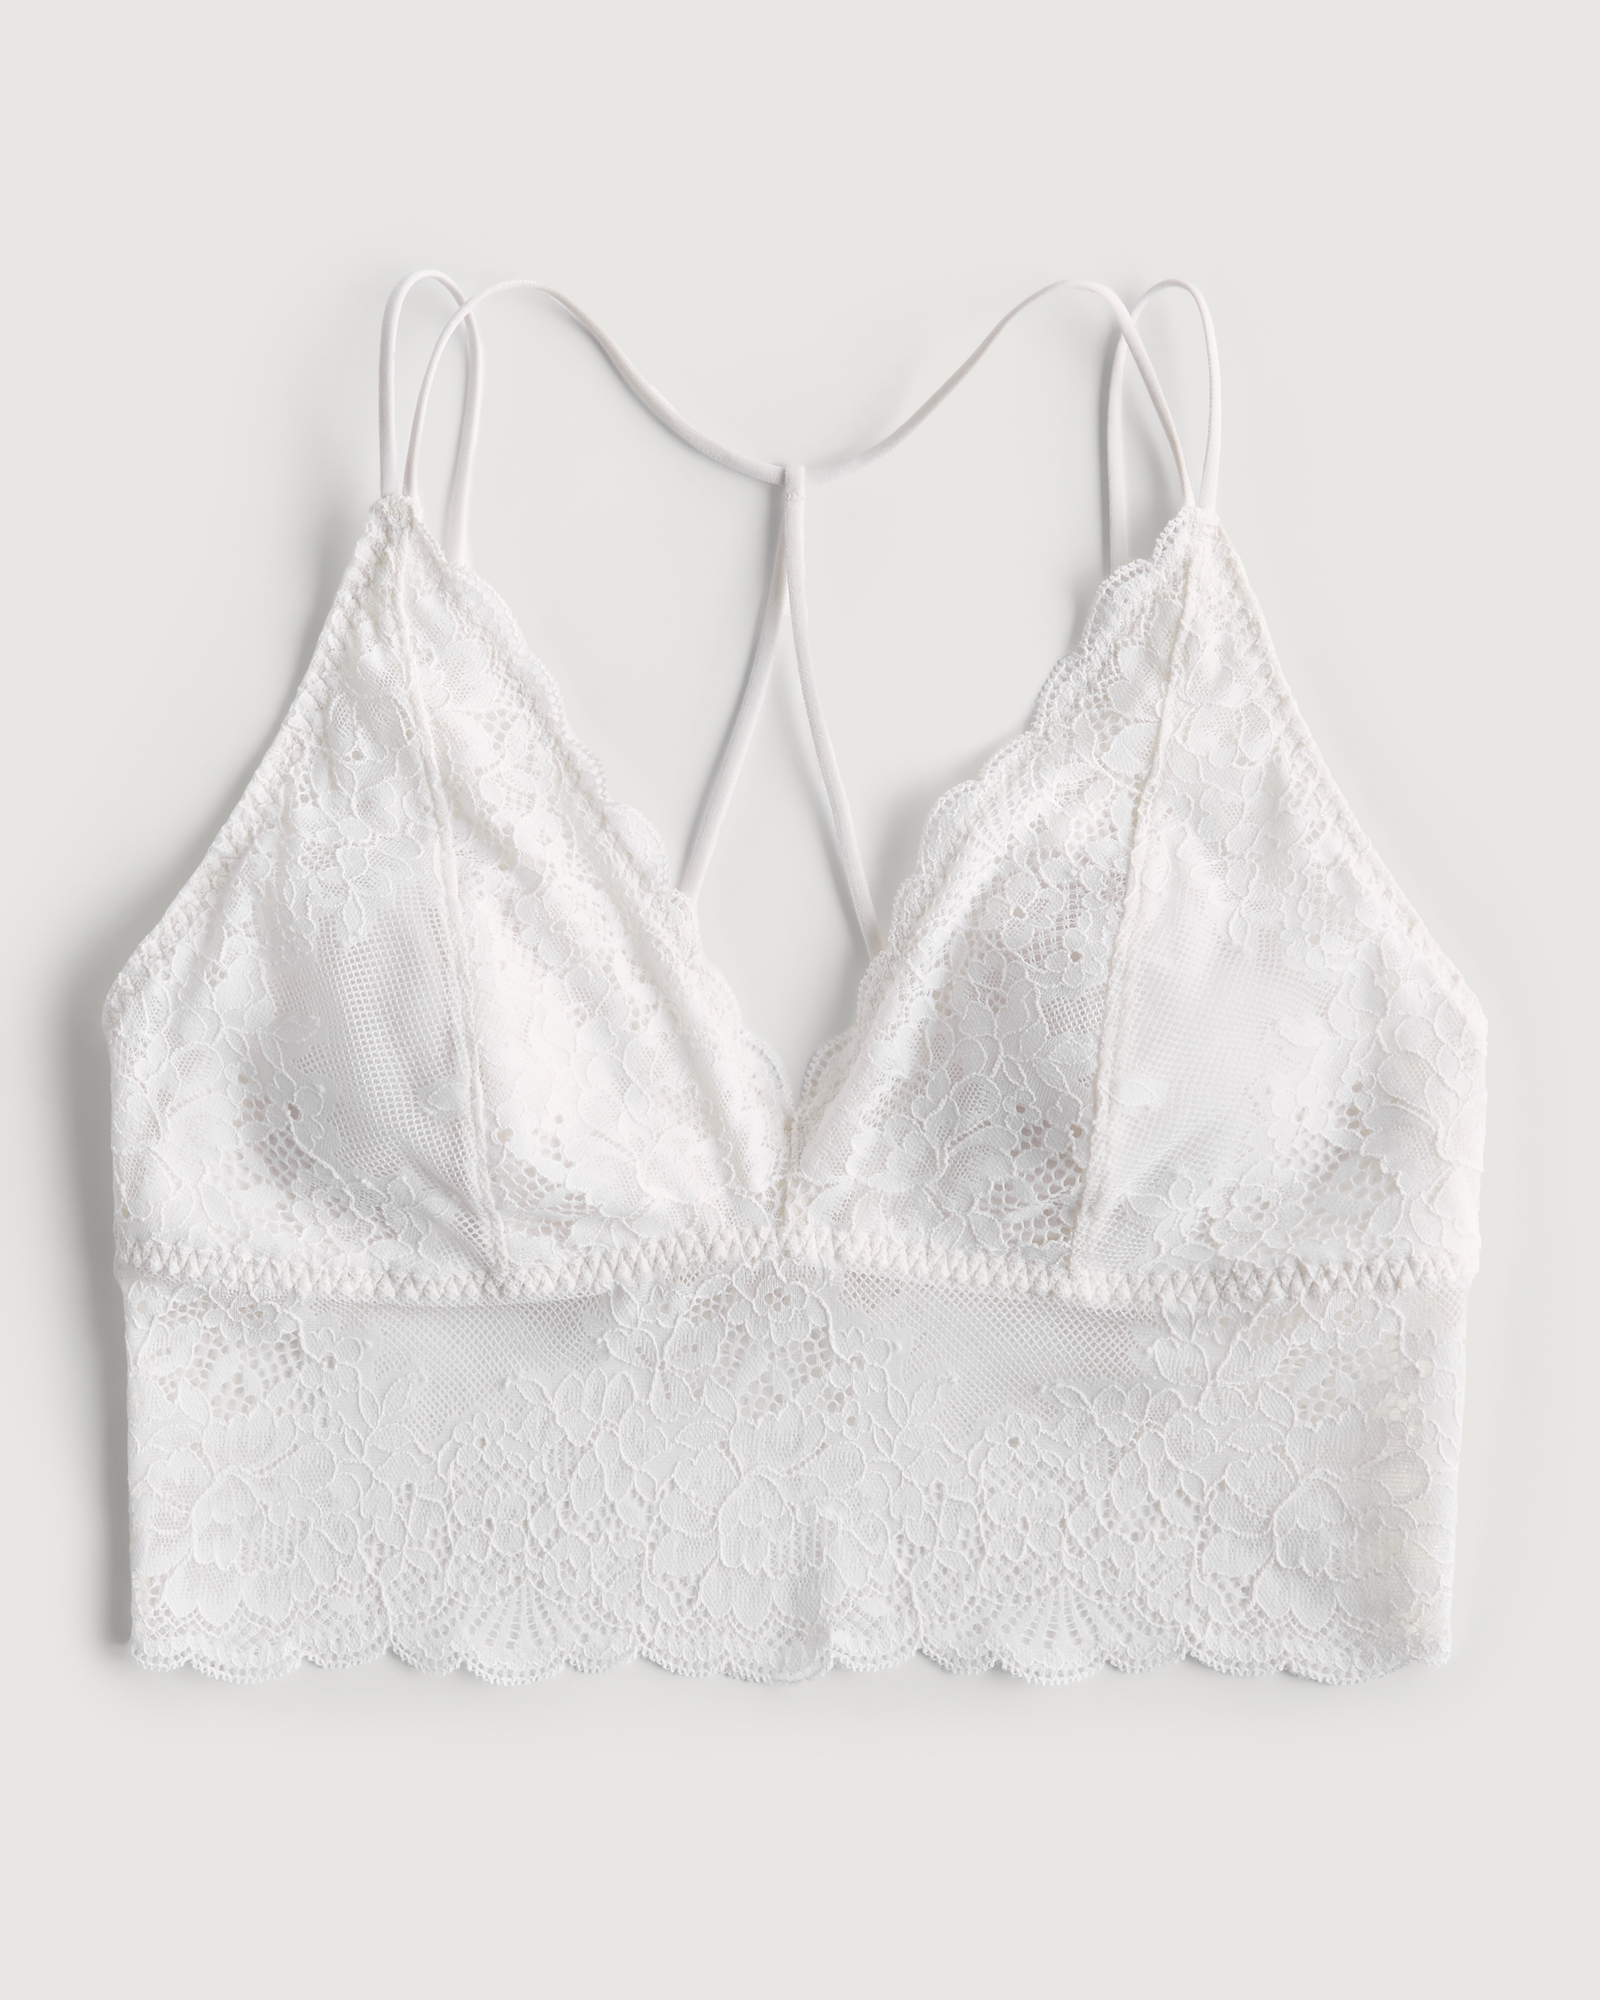 Abercrombie & Fitch, Intimates & Sleepwear, Abercrombie Fitch Gilly Hicks  Lace Bralette Nwt Price Is Firm